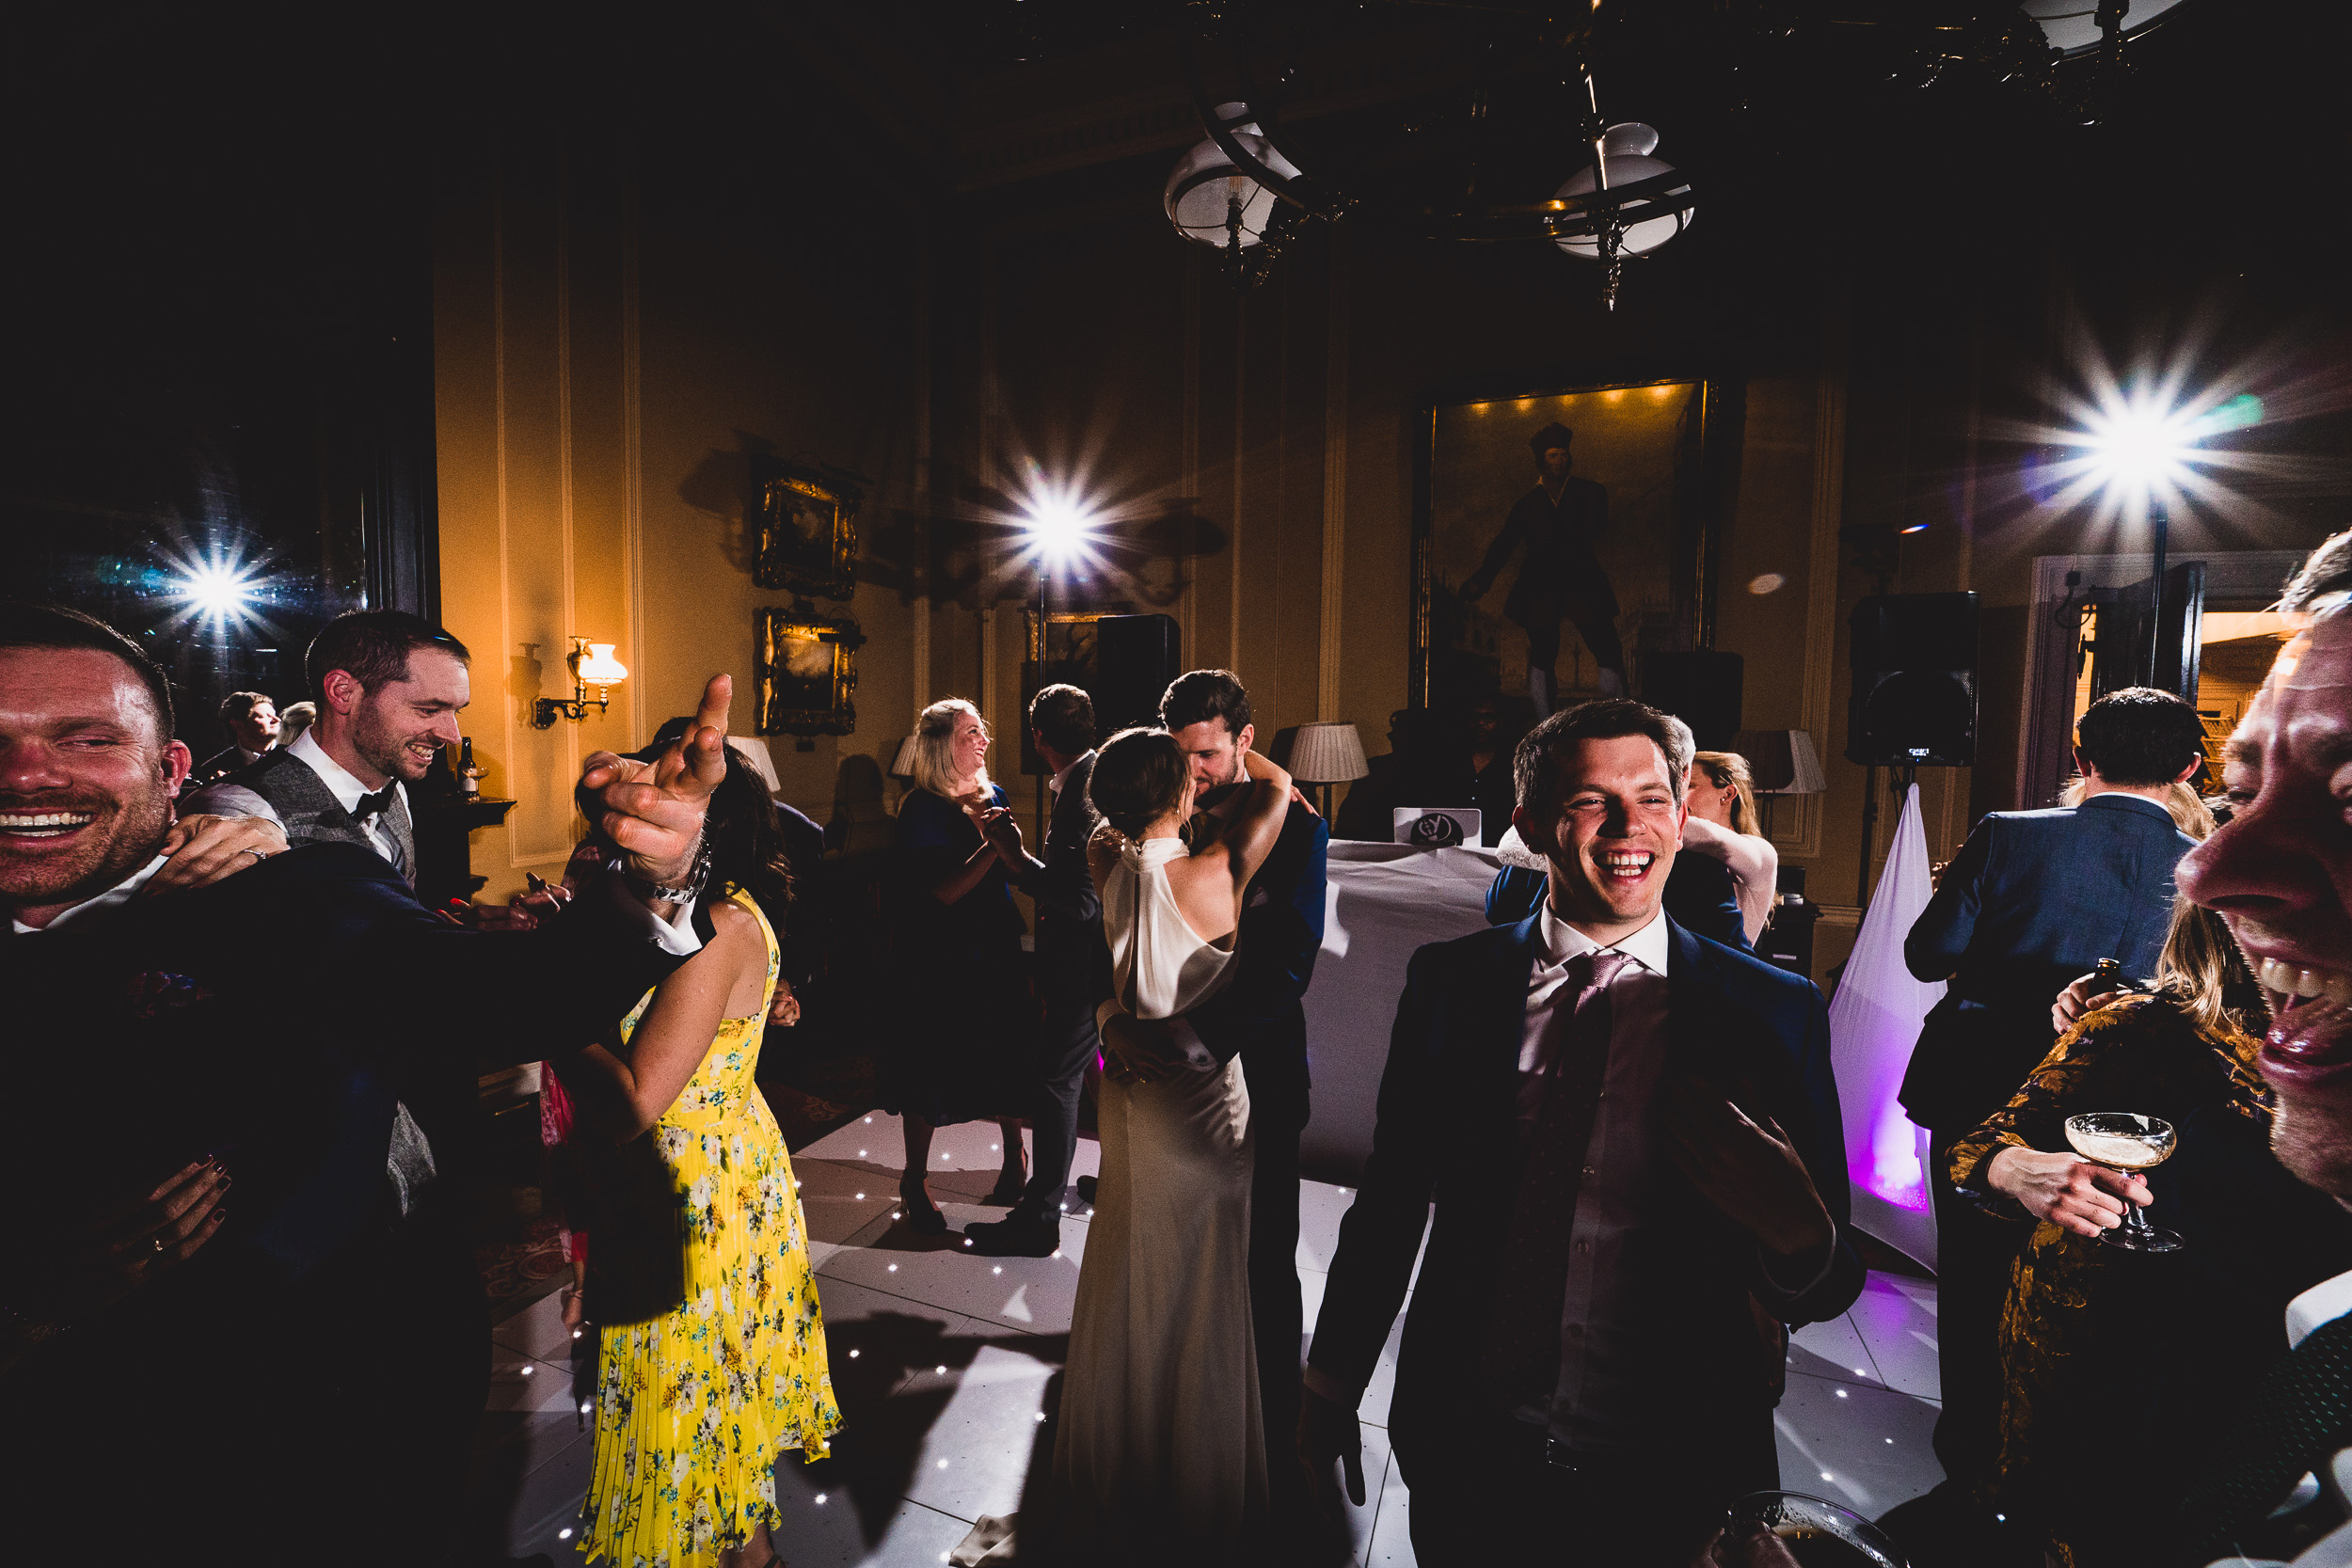 A wedding photographer capturing the groom and a group of people dancing at a wedding reception.